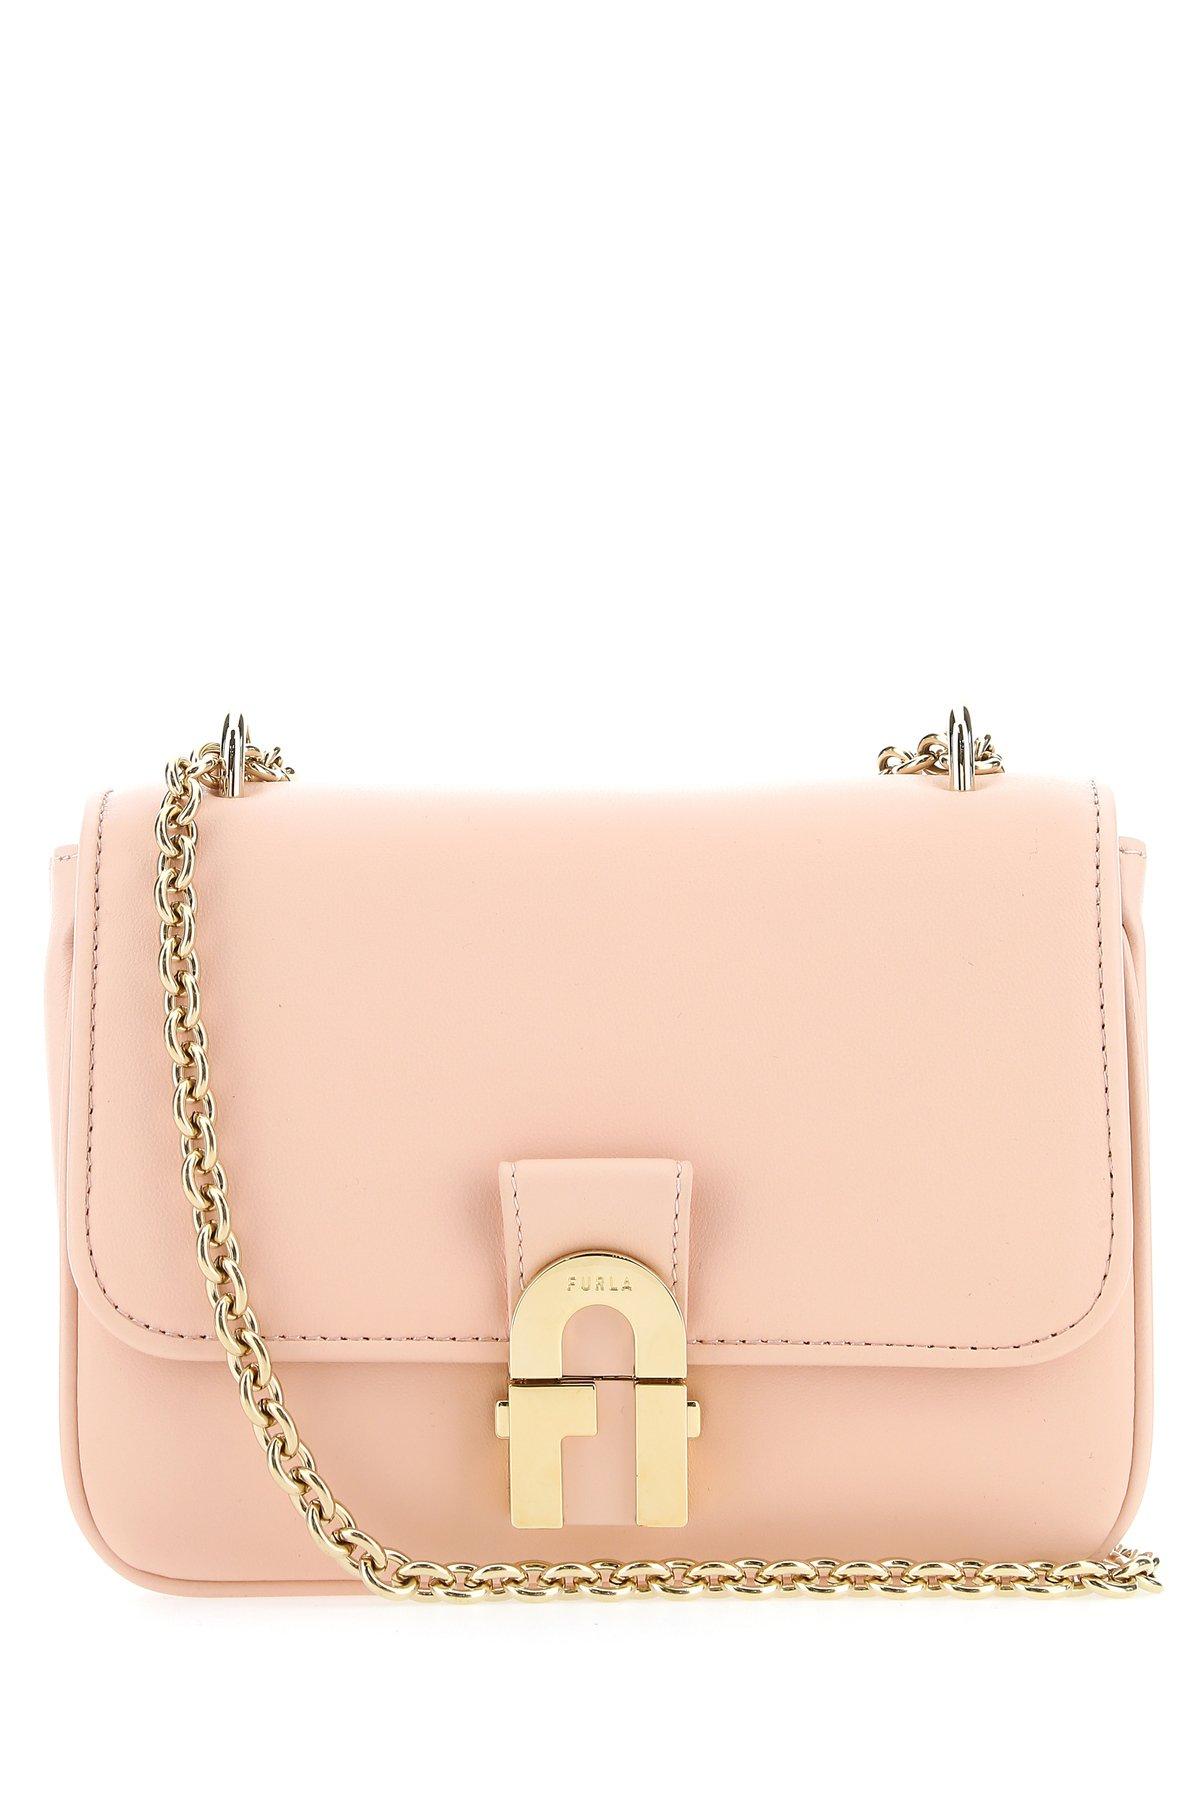 Furla Leather Cosy Mini Shoulder Bag in Pink - Lyst